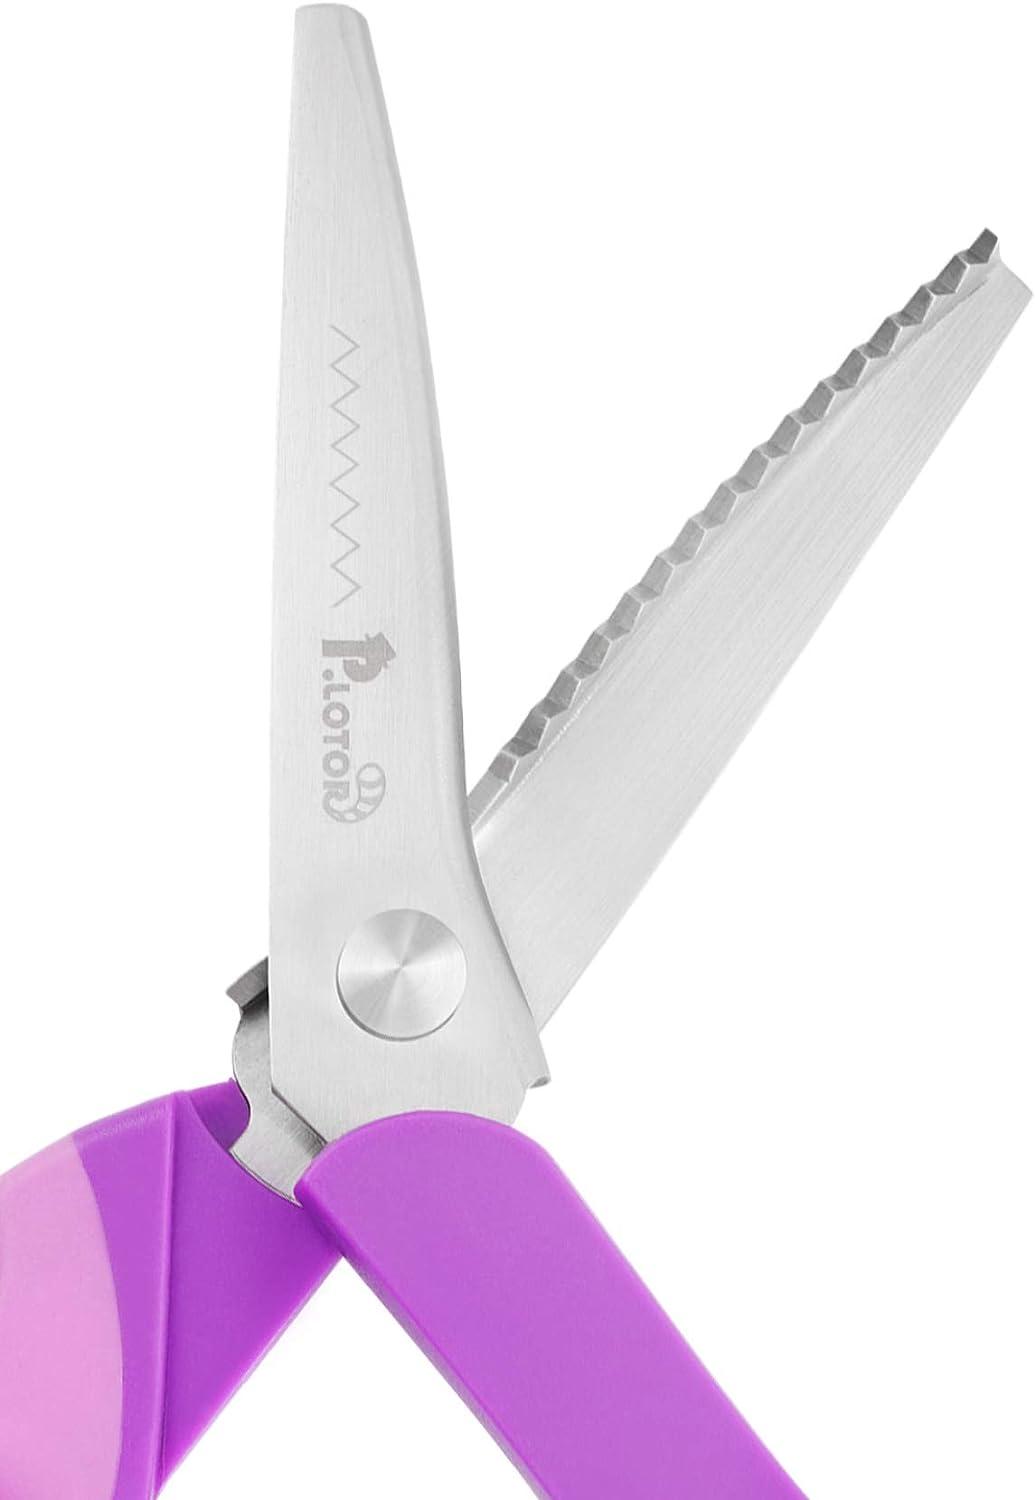 Ohtomber Pinking Shears Craft Scissors - 9 Stainless Steel Pinking